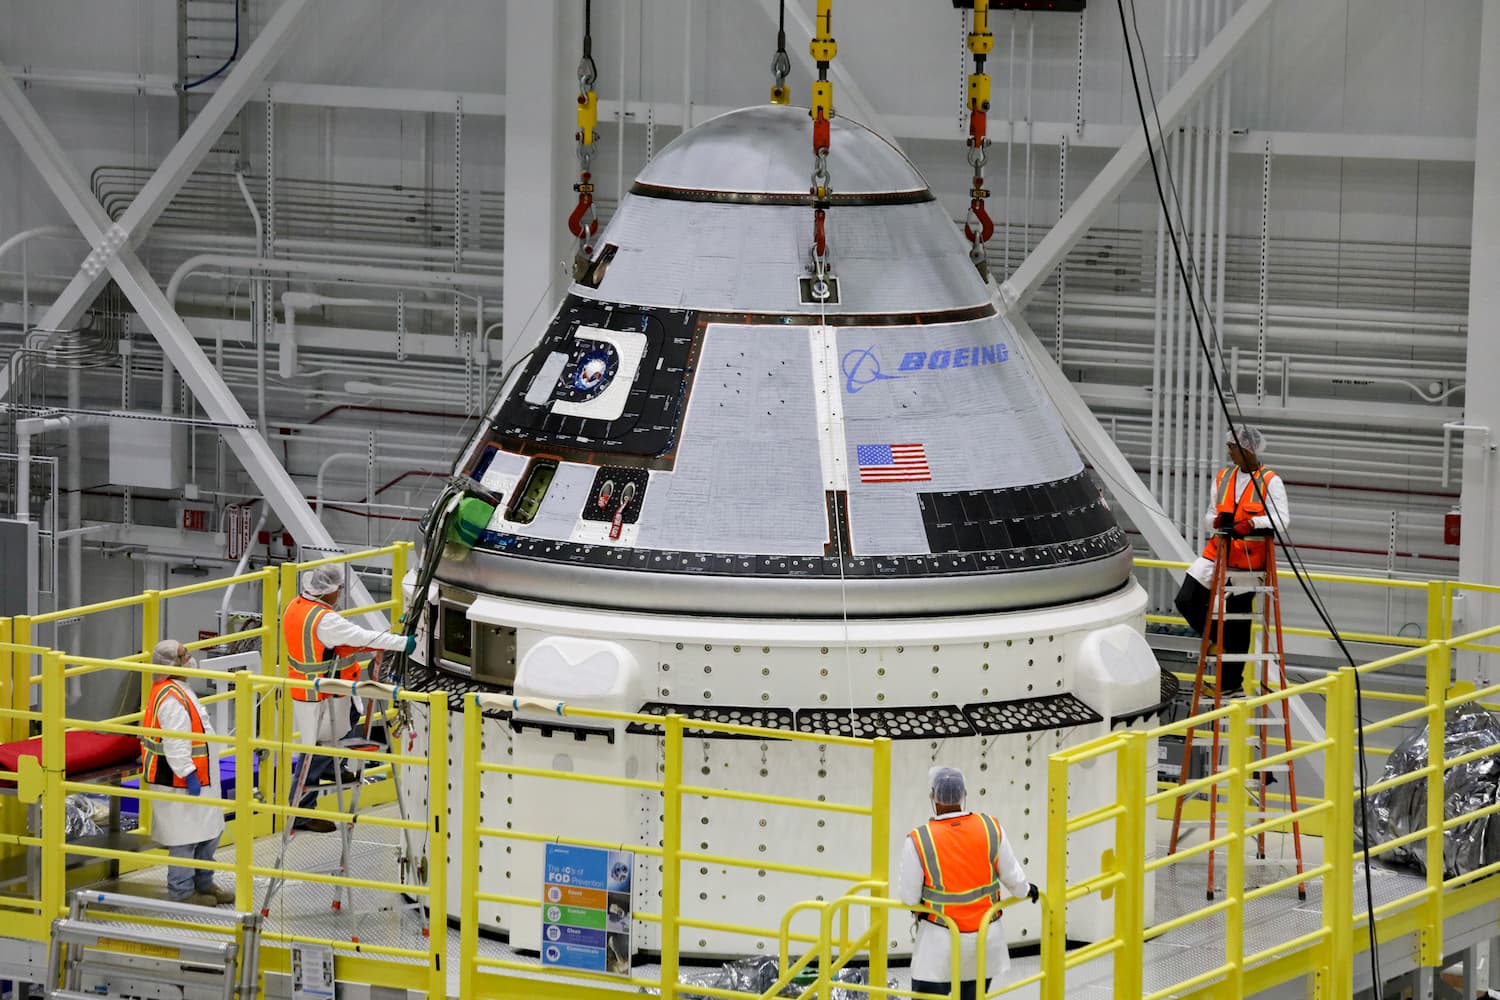 Boeing Will Re-fly Starliner Capsule After Failed Test Flight